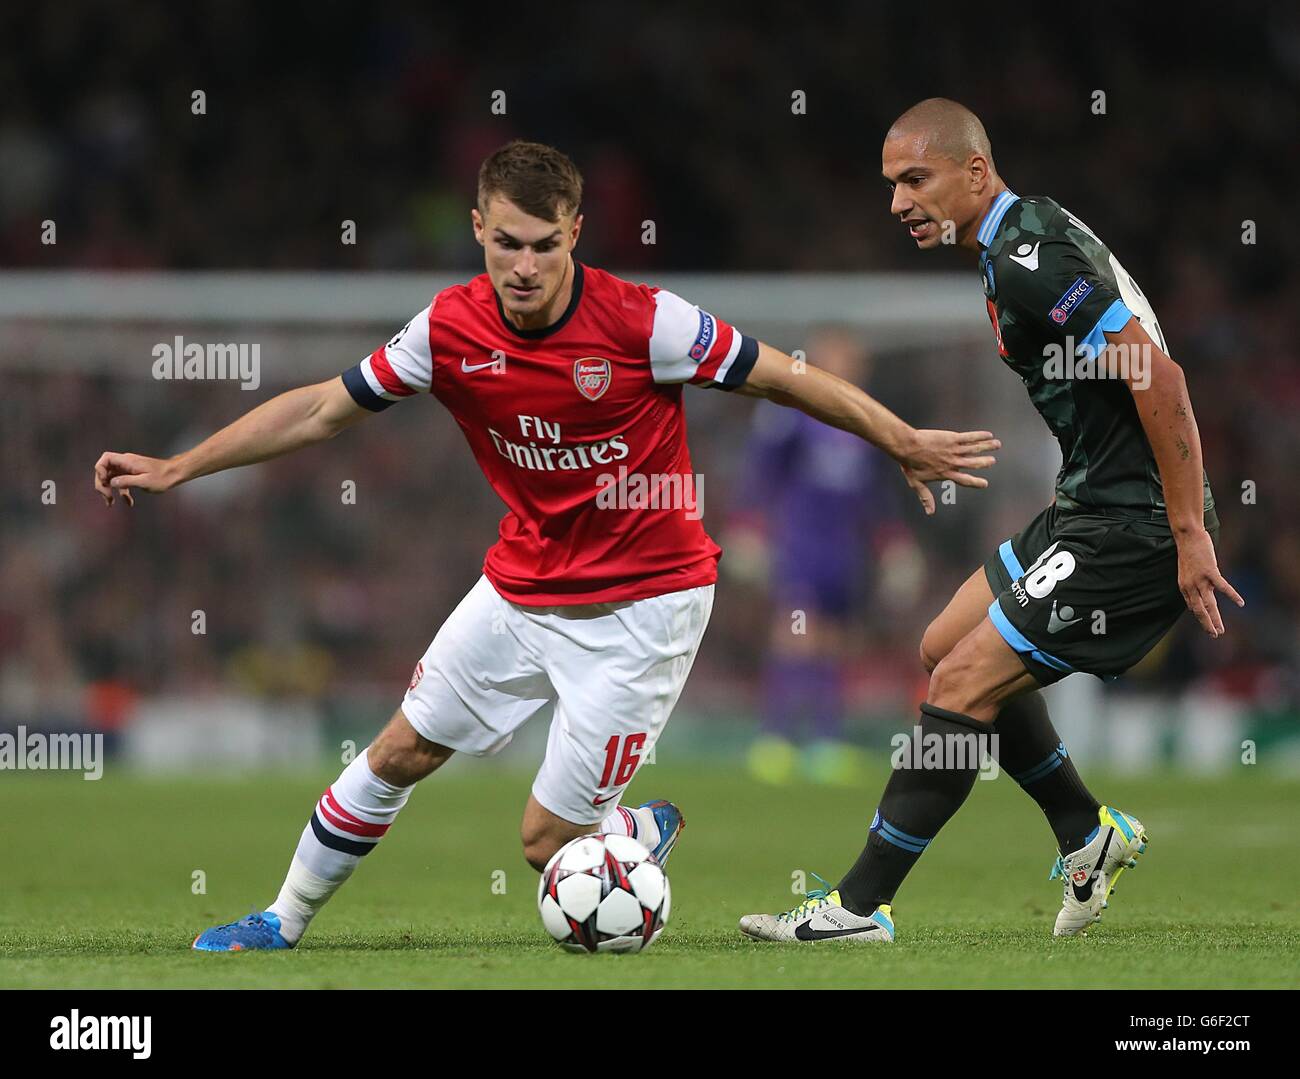 Napoli's Gokhan Inler (right) and Arsenal's Aaron Ramsey (left) battle for the ball Stock Photo